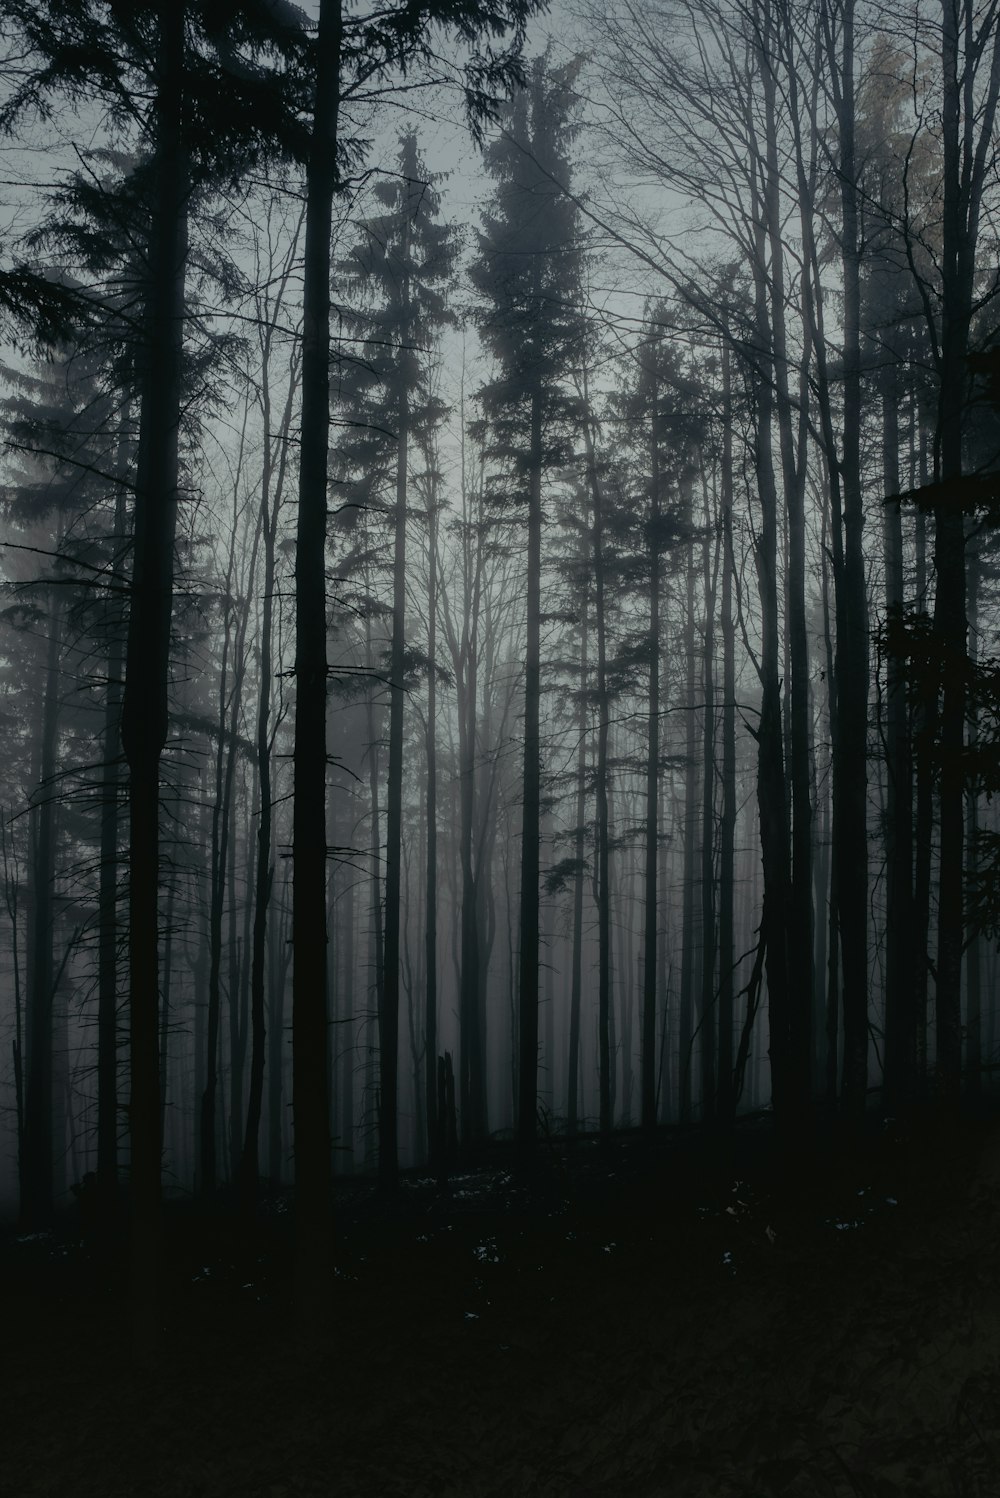 grayscale photo of forest trees